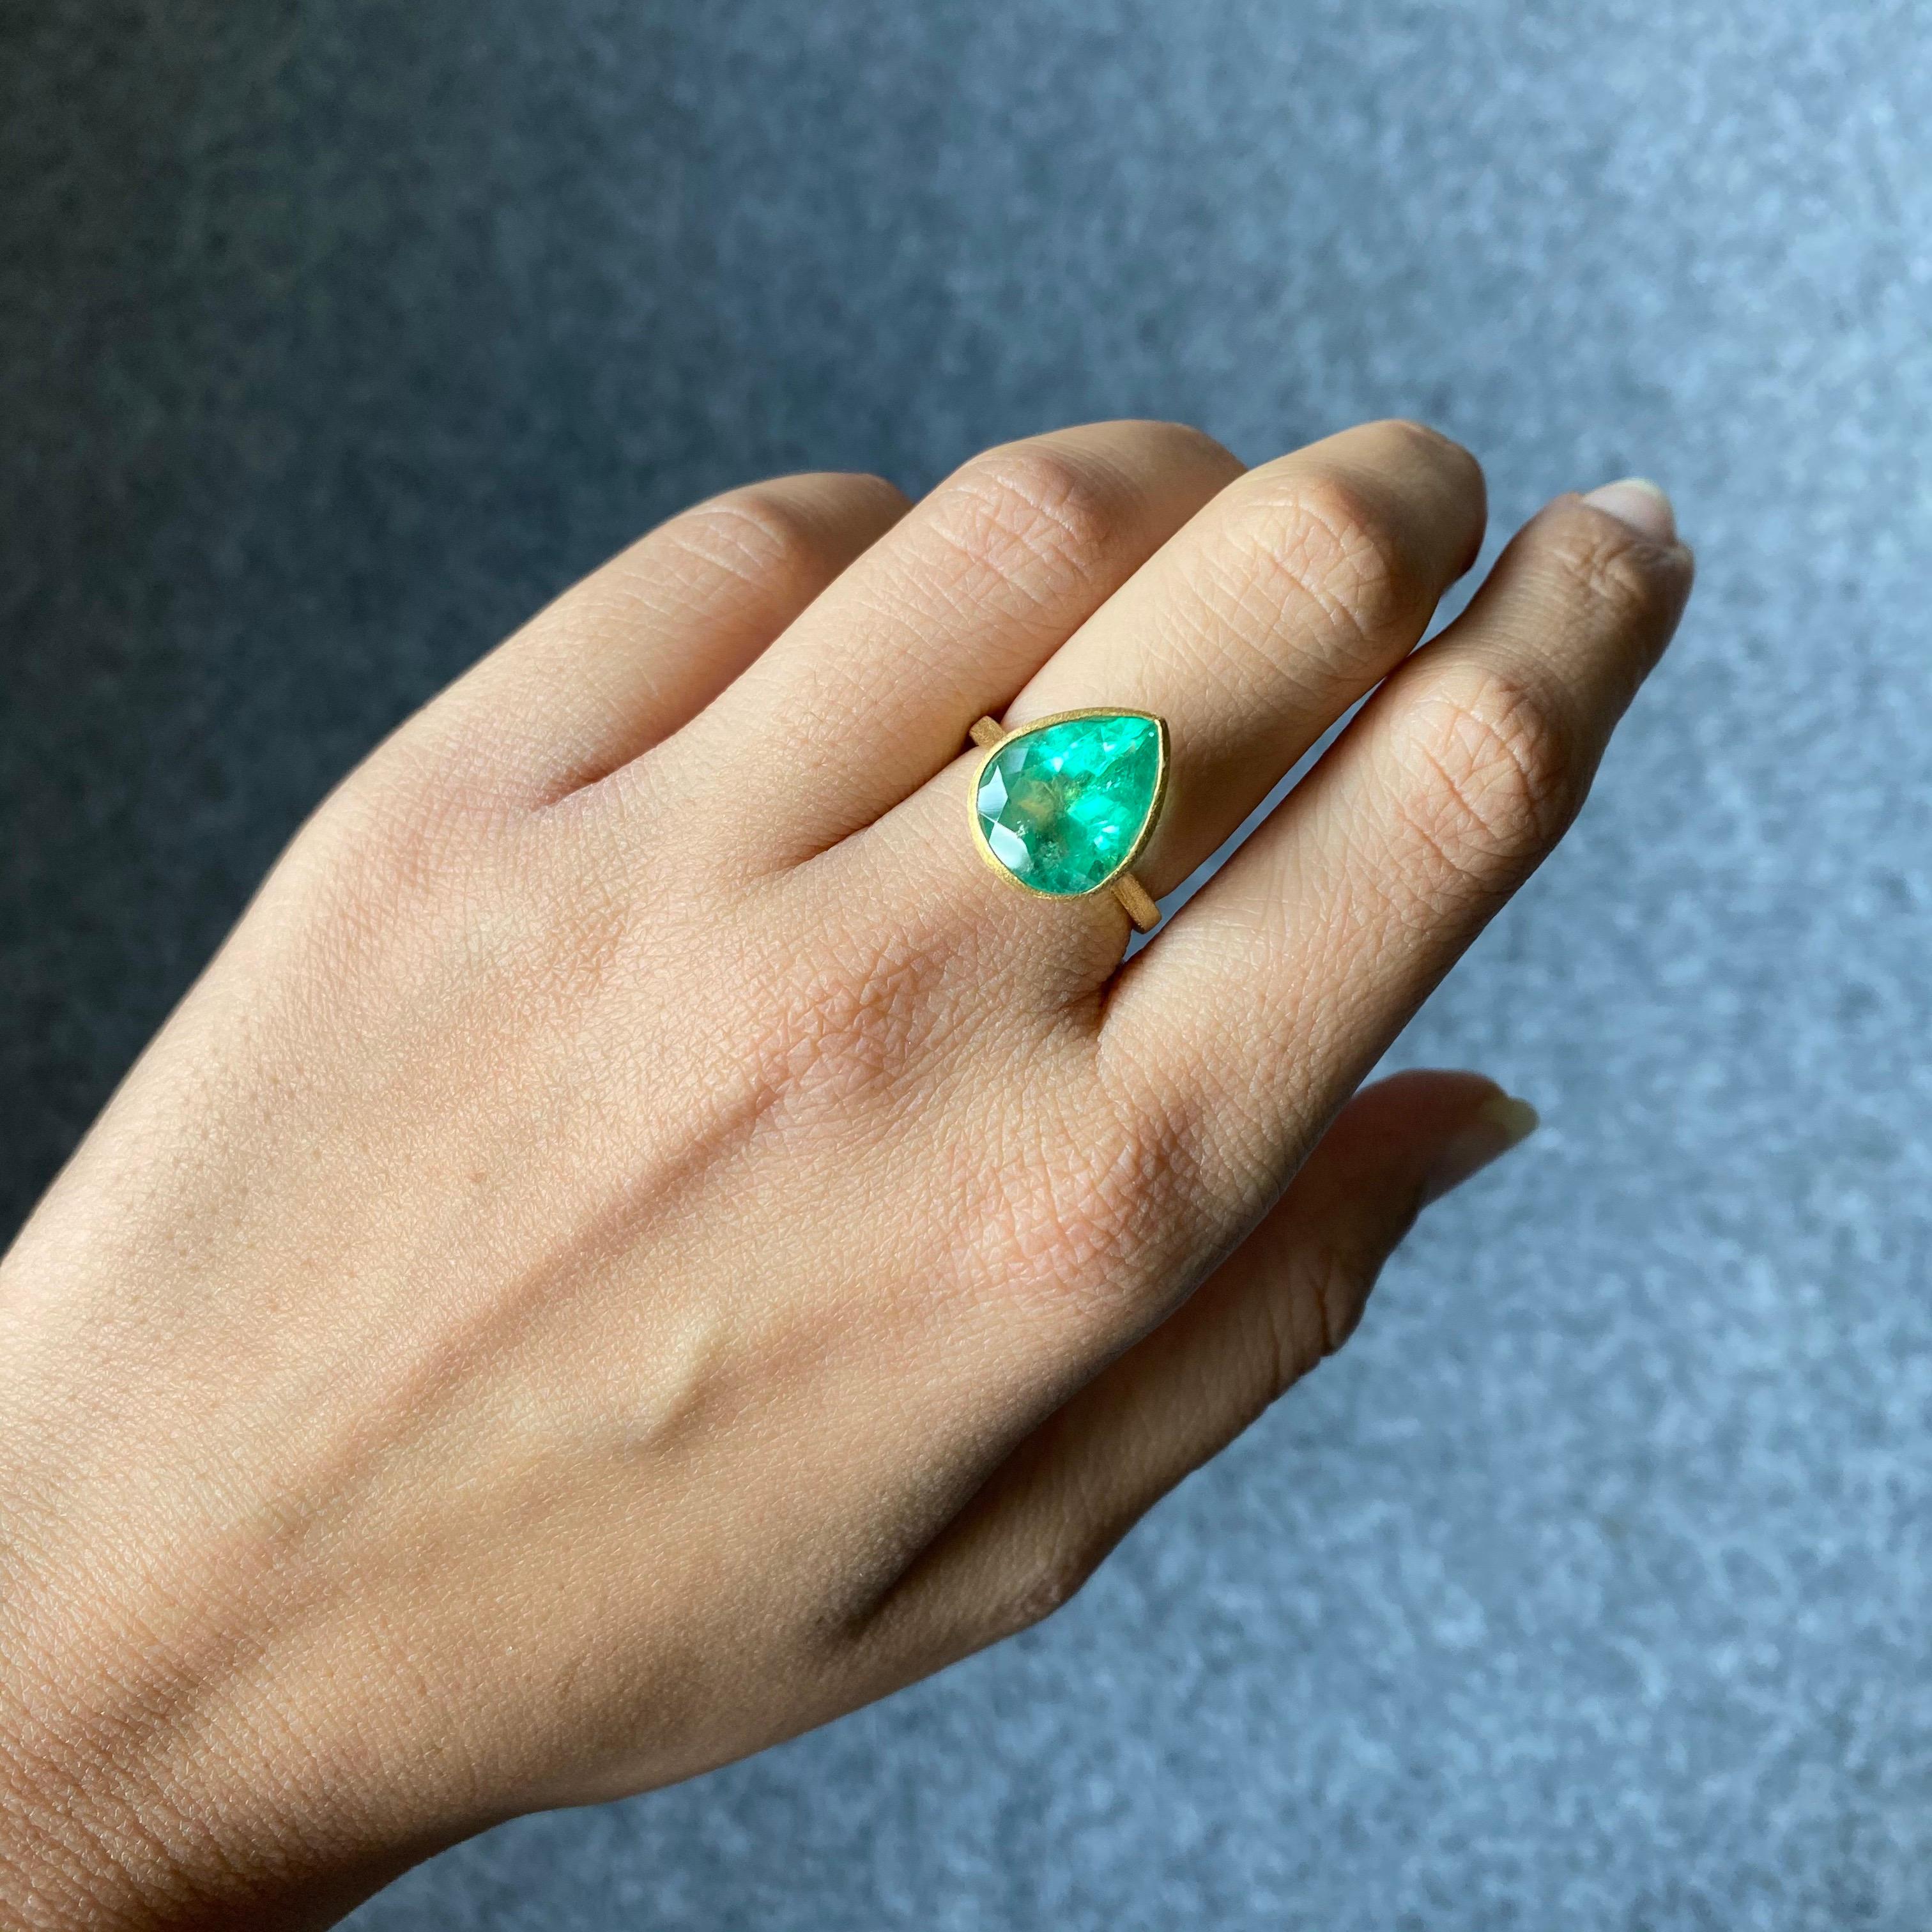 A simple, and classic single stone ring - with a 4.63 carat, natural (not treated/dyed) pear shape Colombian Emerald centre stone set in 4.4 grams of matte finish 18K Yellow Gold. The stone has great luster to it, and an ideal color. Currently sized